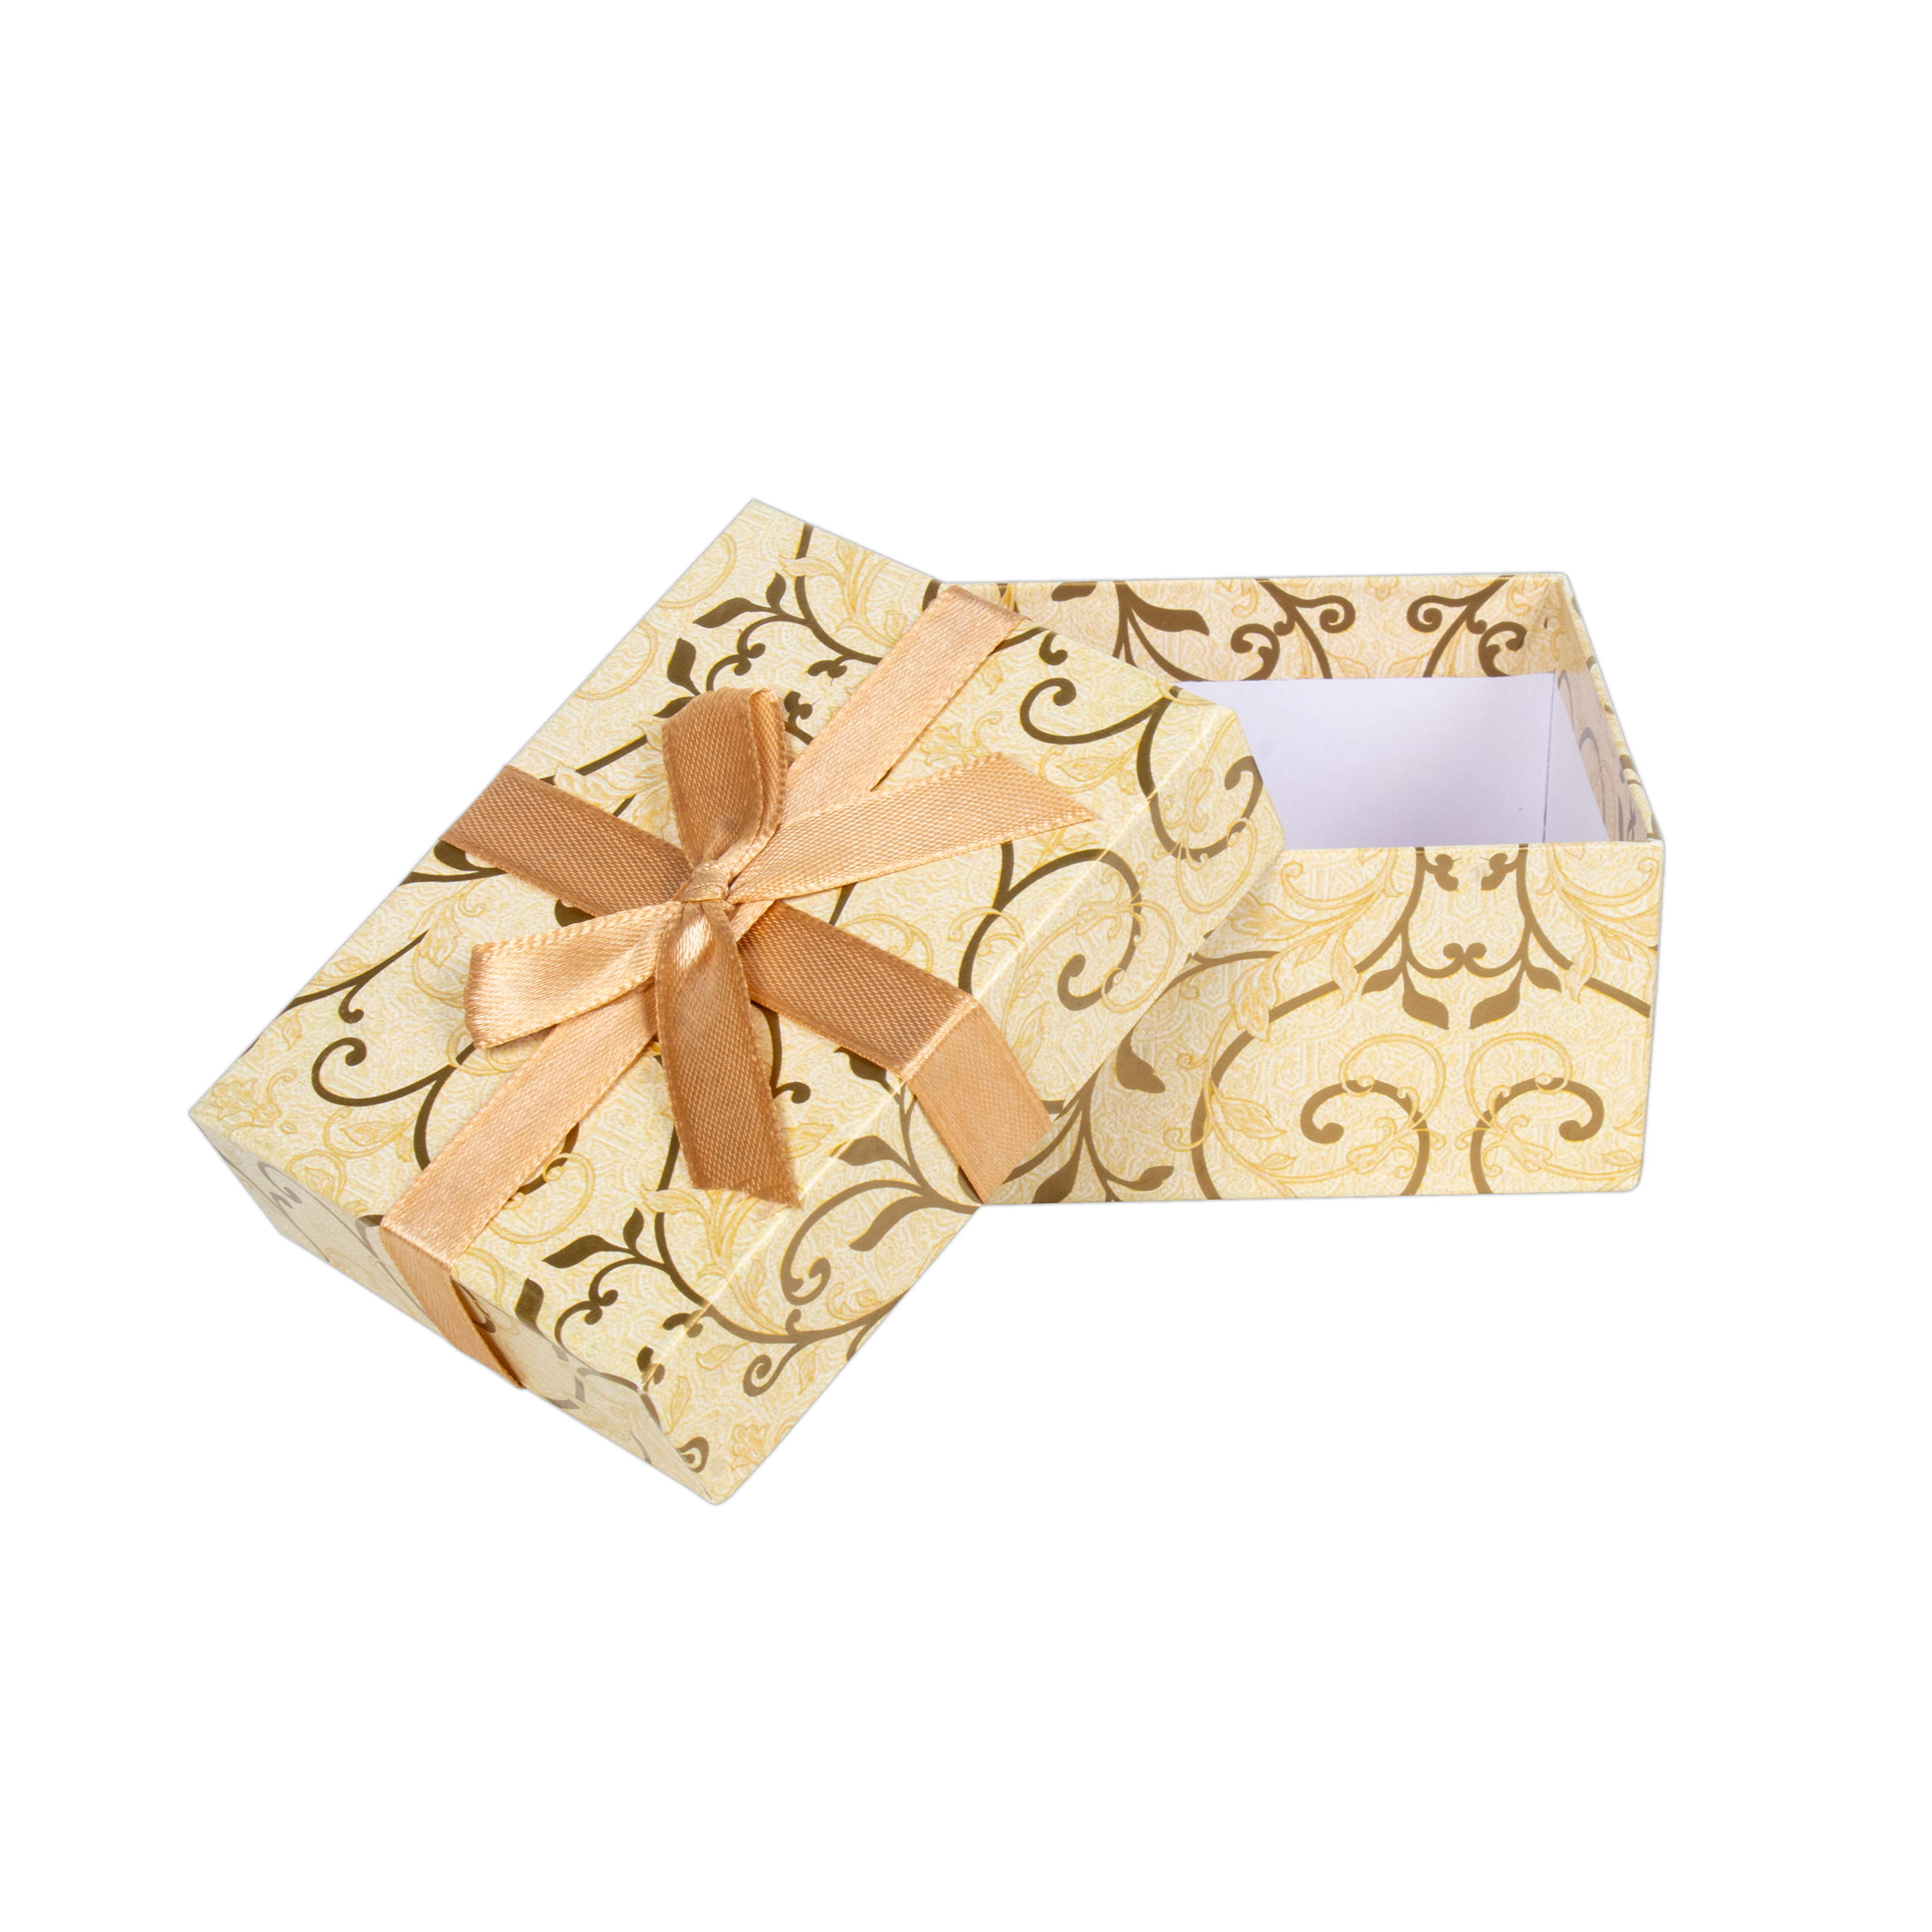 Gift Box With Bow Floral Swirls Ivory Shimmer L10.5 X W8 X D5.4(cm)